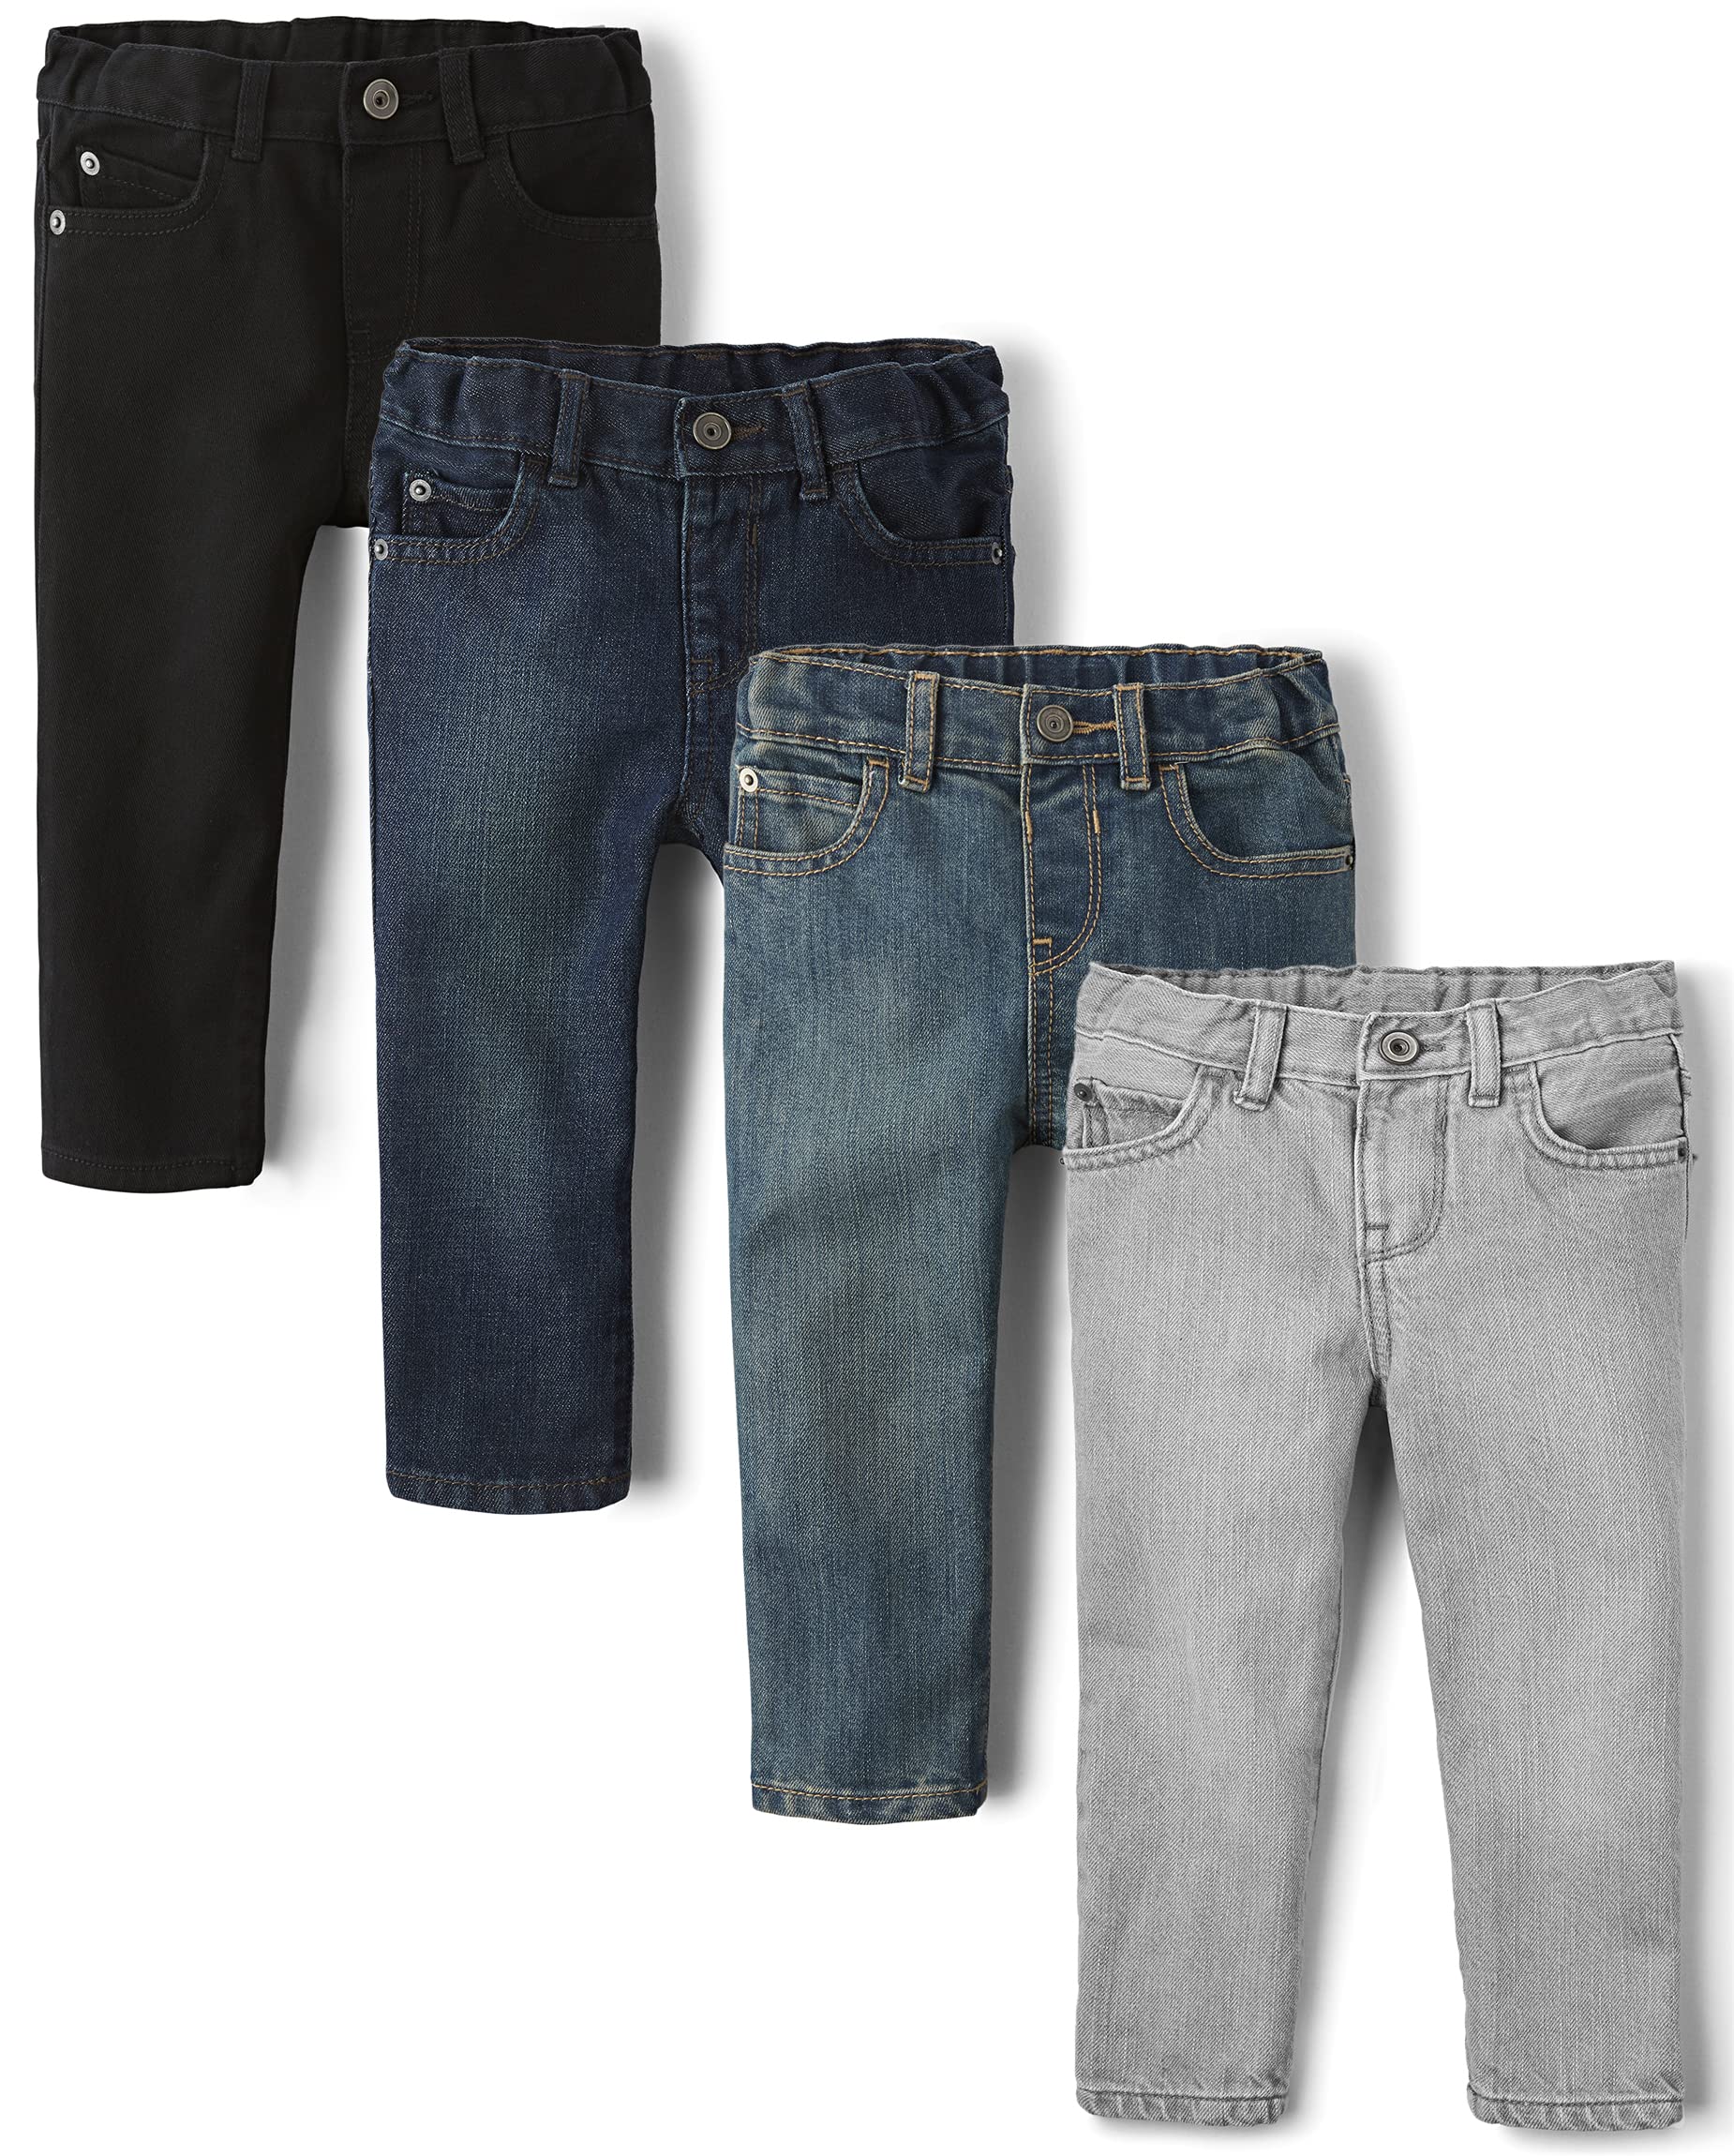 The Children's Place Baby Toddler Boys Basic Skinny Jeans 4-Pack